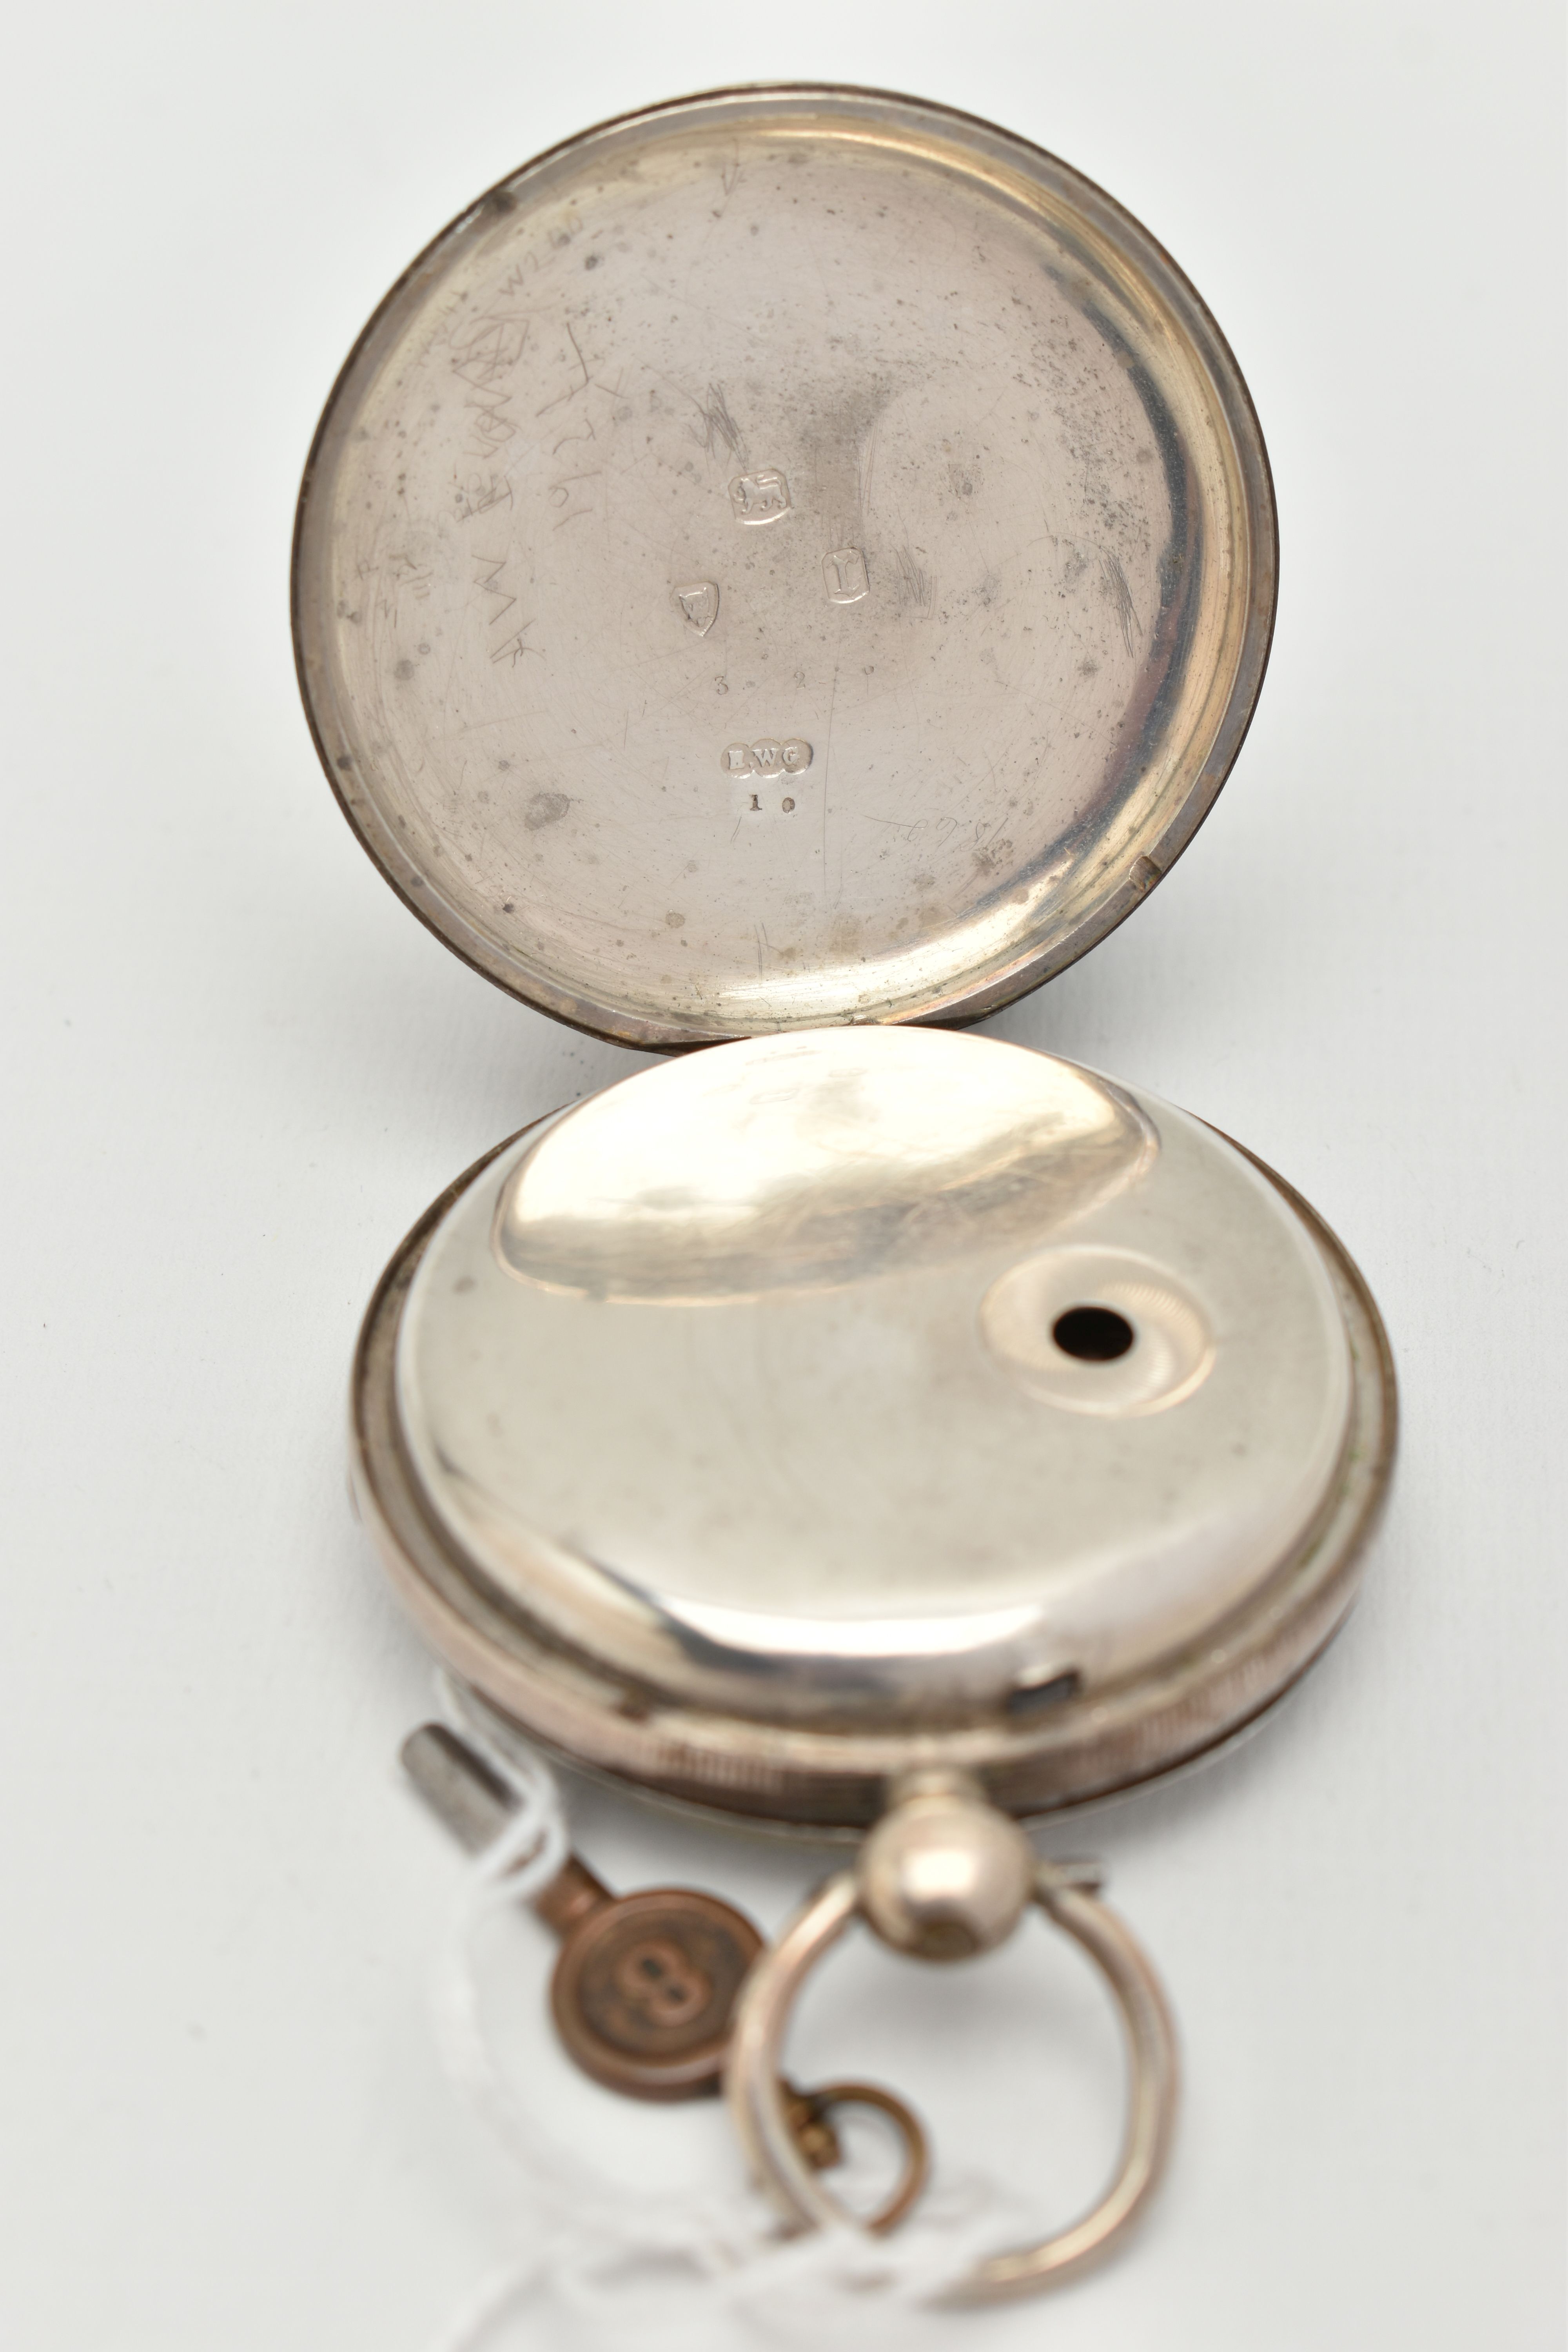 A SILVER MID VICTORIAN OPEN FACE POCKET WATCH, key wound movement, round dial, Roman numerals, - Image 4 of 5